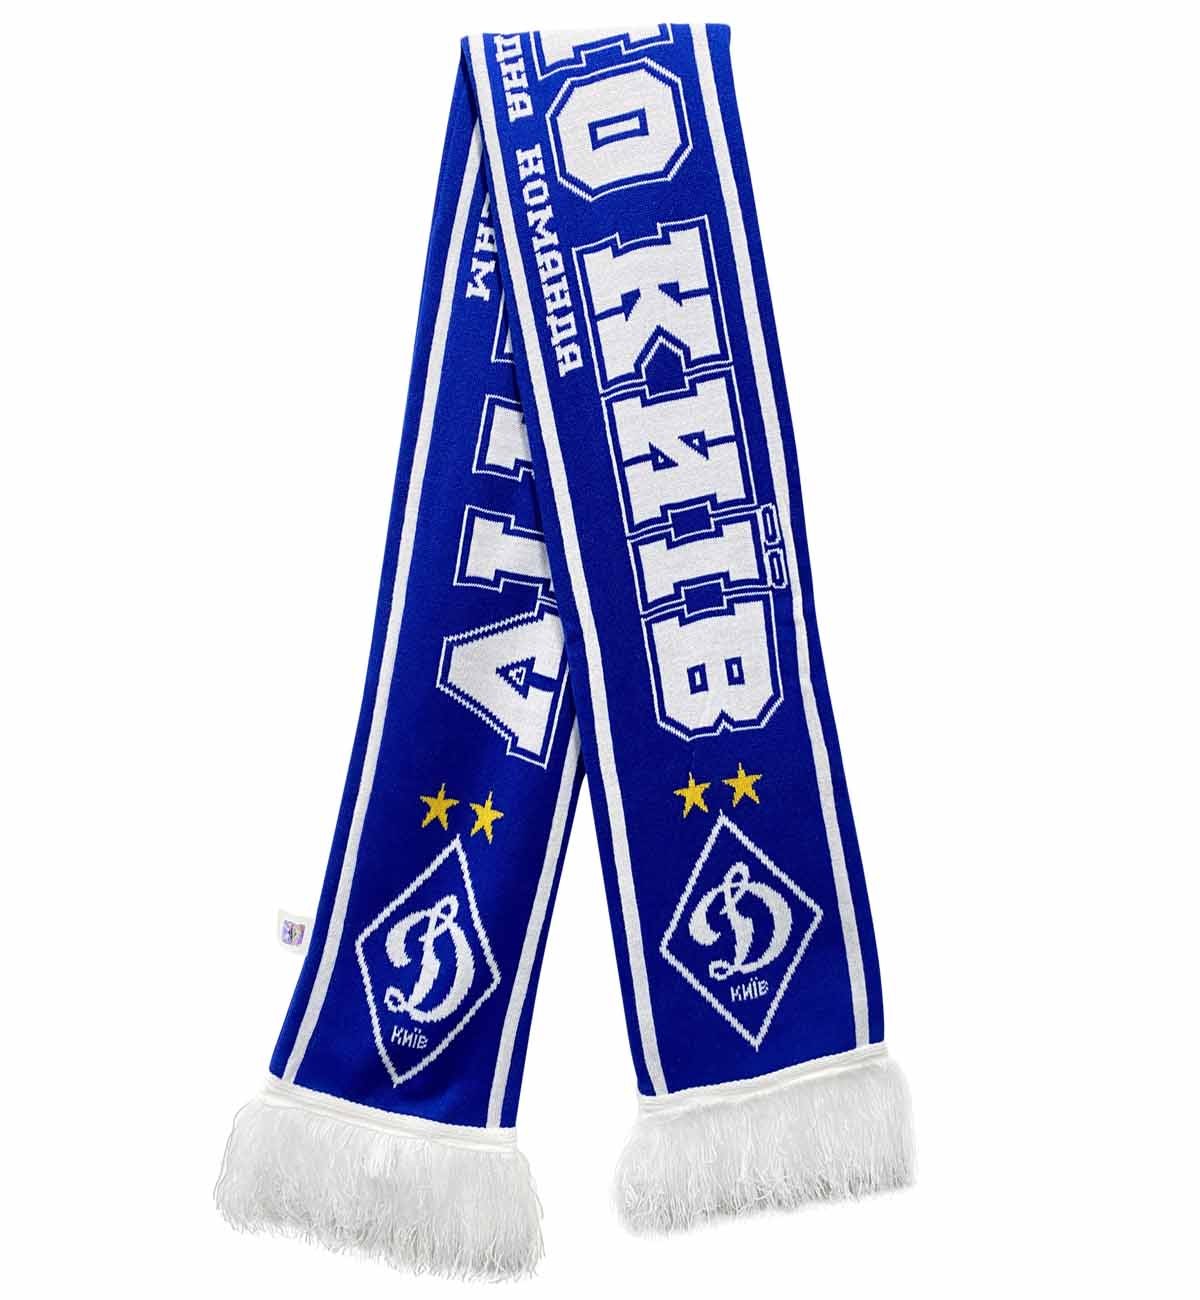 Fans scarf "One life-one team"